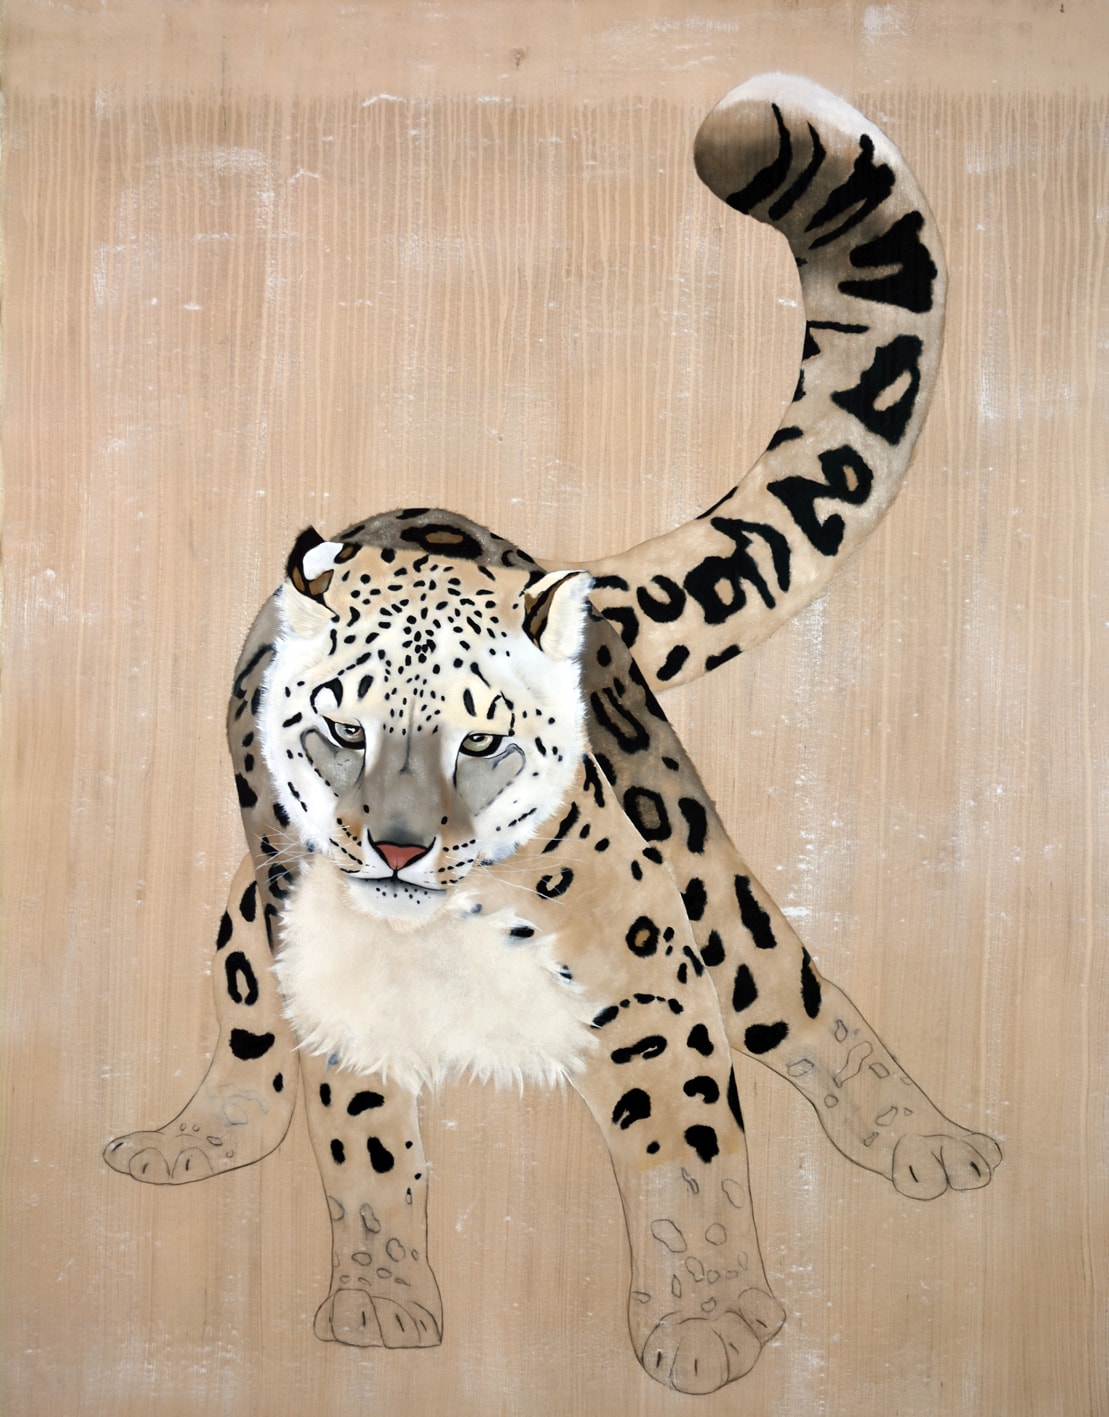 COMPAGNIE MONEGASQUE DE BANQUE snow-leopard-panthera-uncia-ounce-threatened-endangered-extinction Thierry Bisch Contemporary painter animals painting art  nature biodiversity conservation 